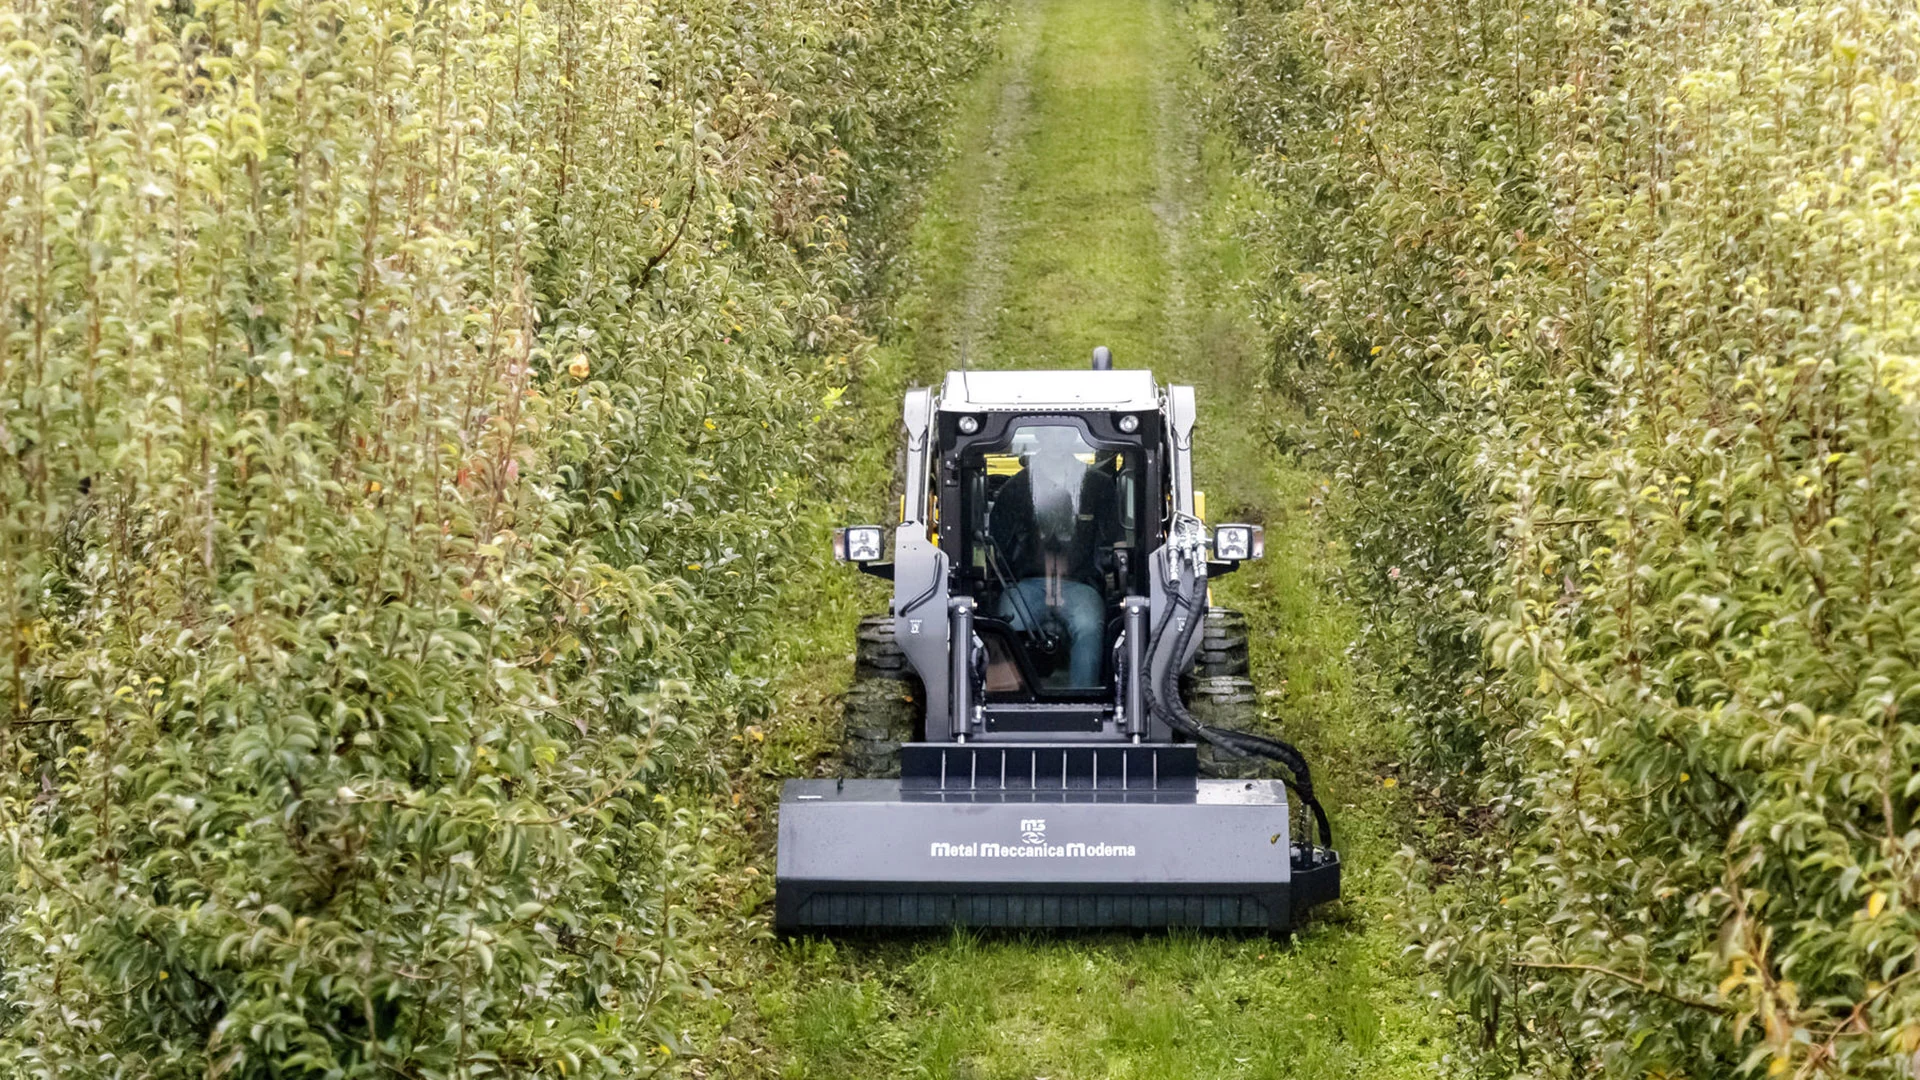 Skid steer loader by navigating orchard path, surrounded by lush fruit trees.